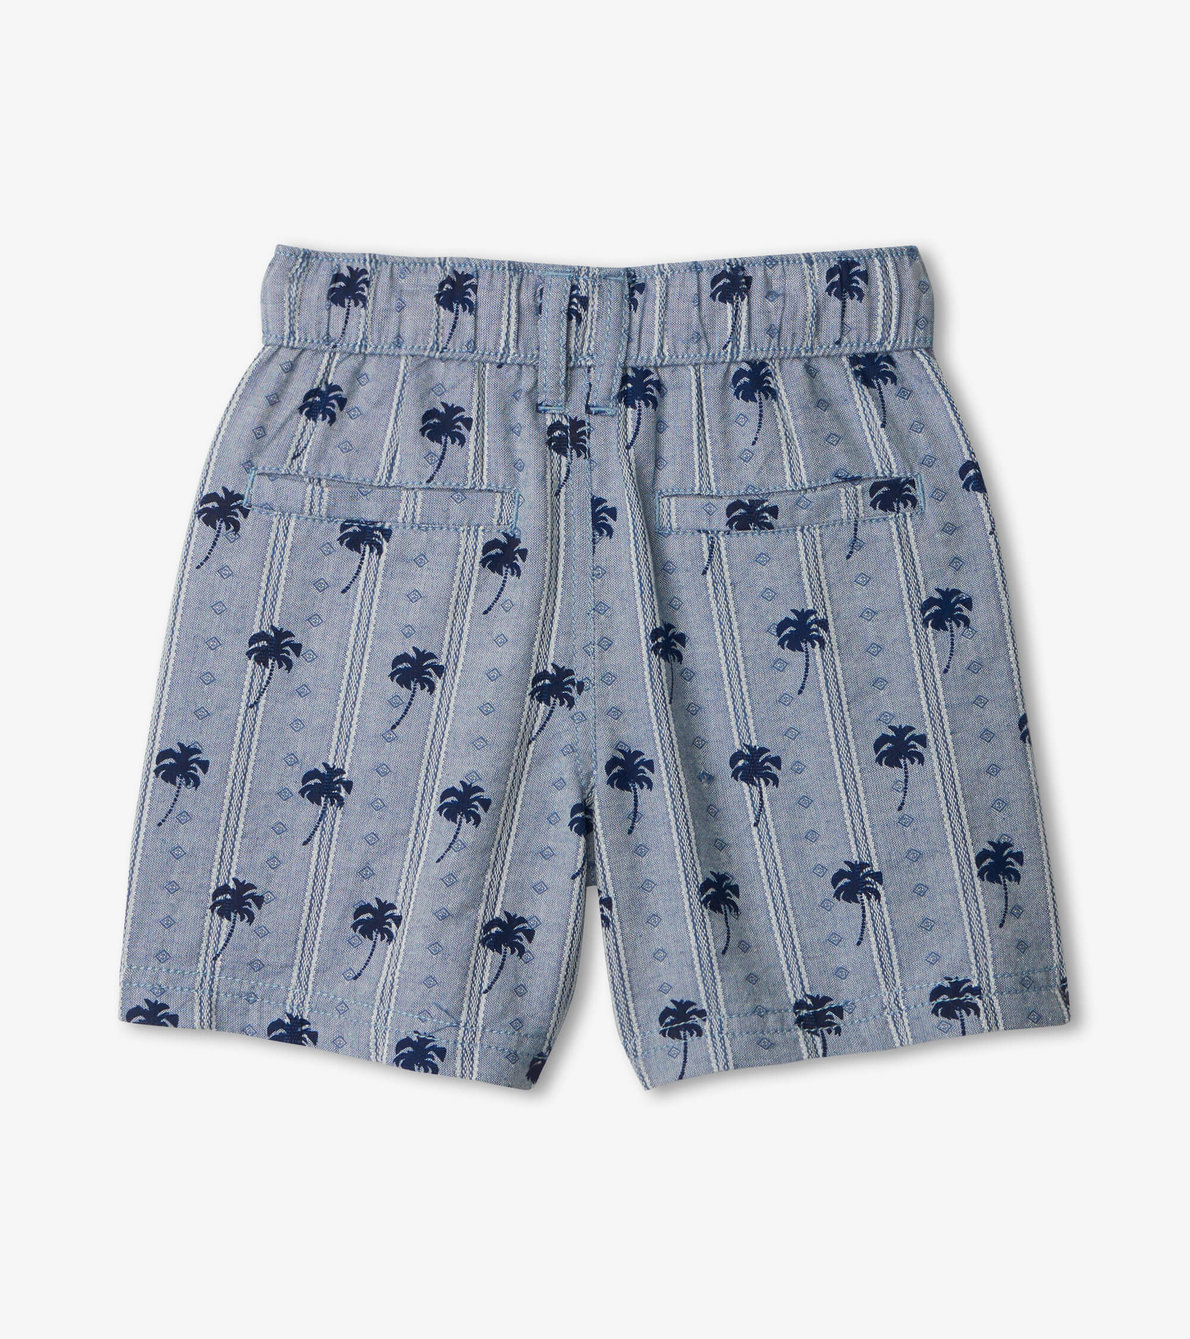 View larger image of Tiny Palms Woven Shorts